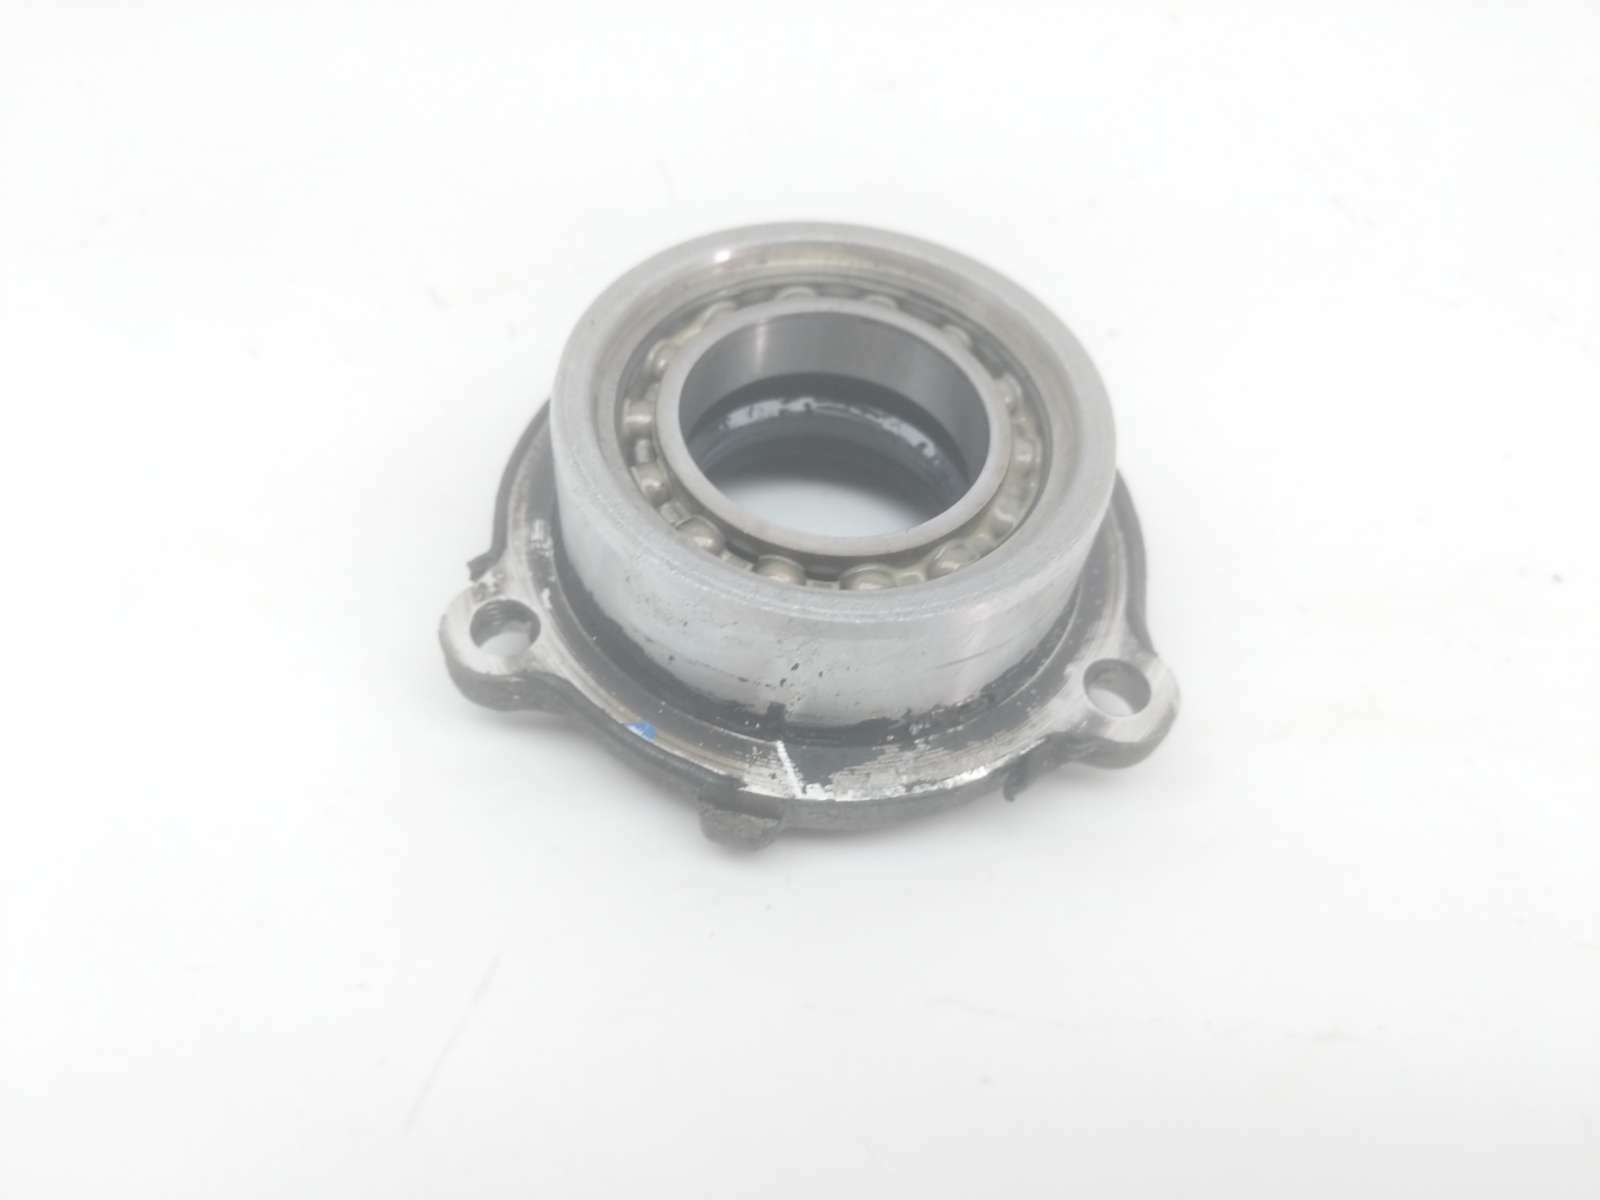 16 Can Am Commander 800R XT Engine Motor Front Center Drive Shaft Bearing Cover